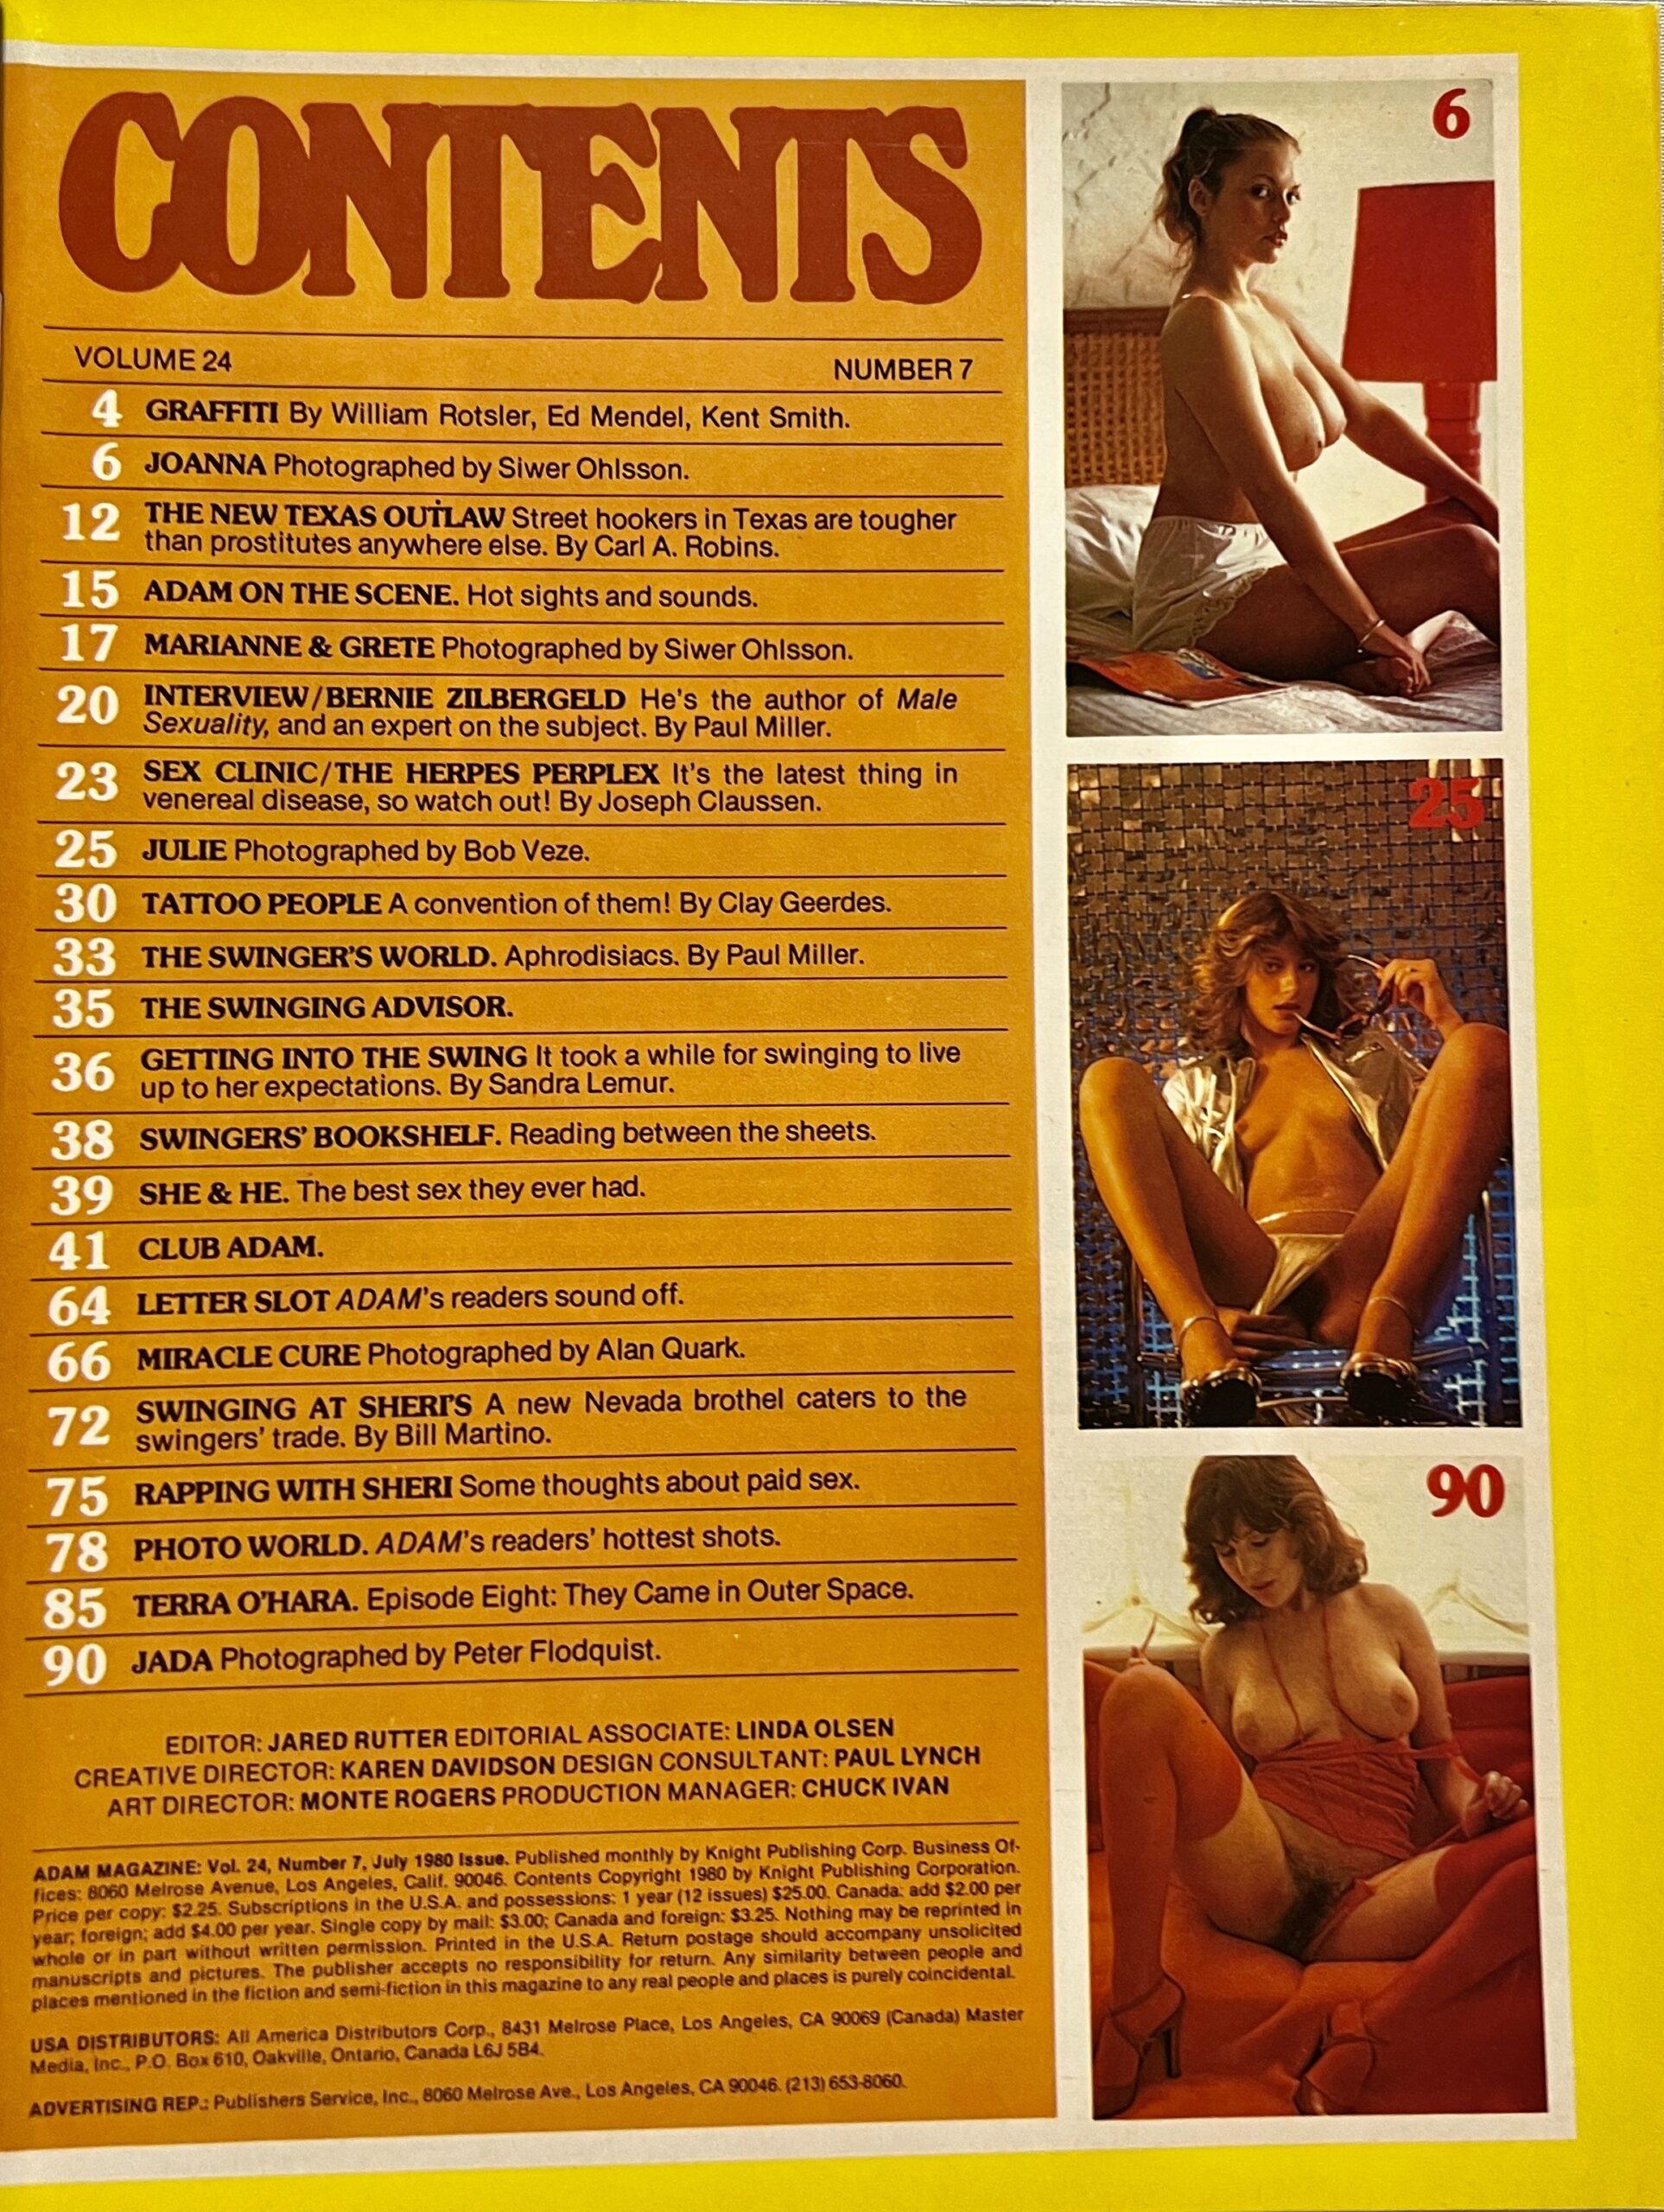 Adam 24/7 July 1980 Adult Swingers and Personals